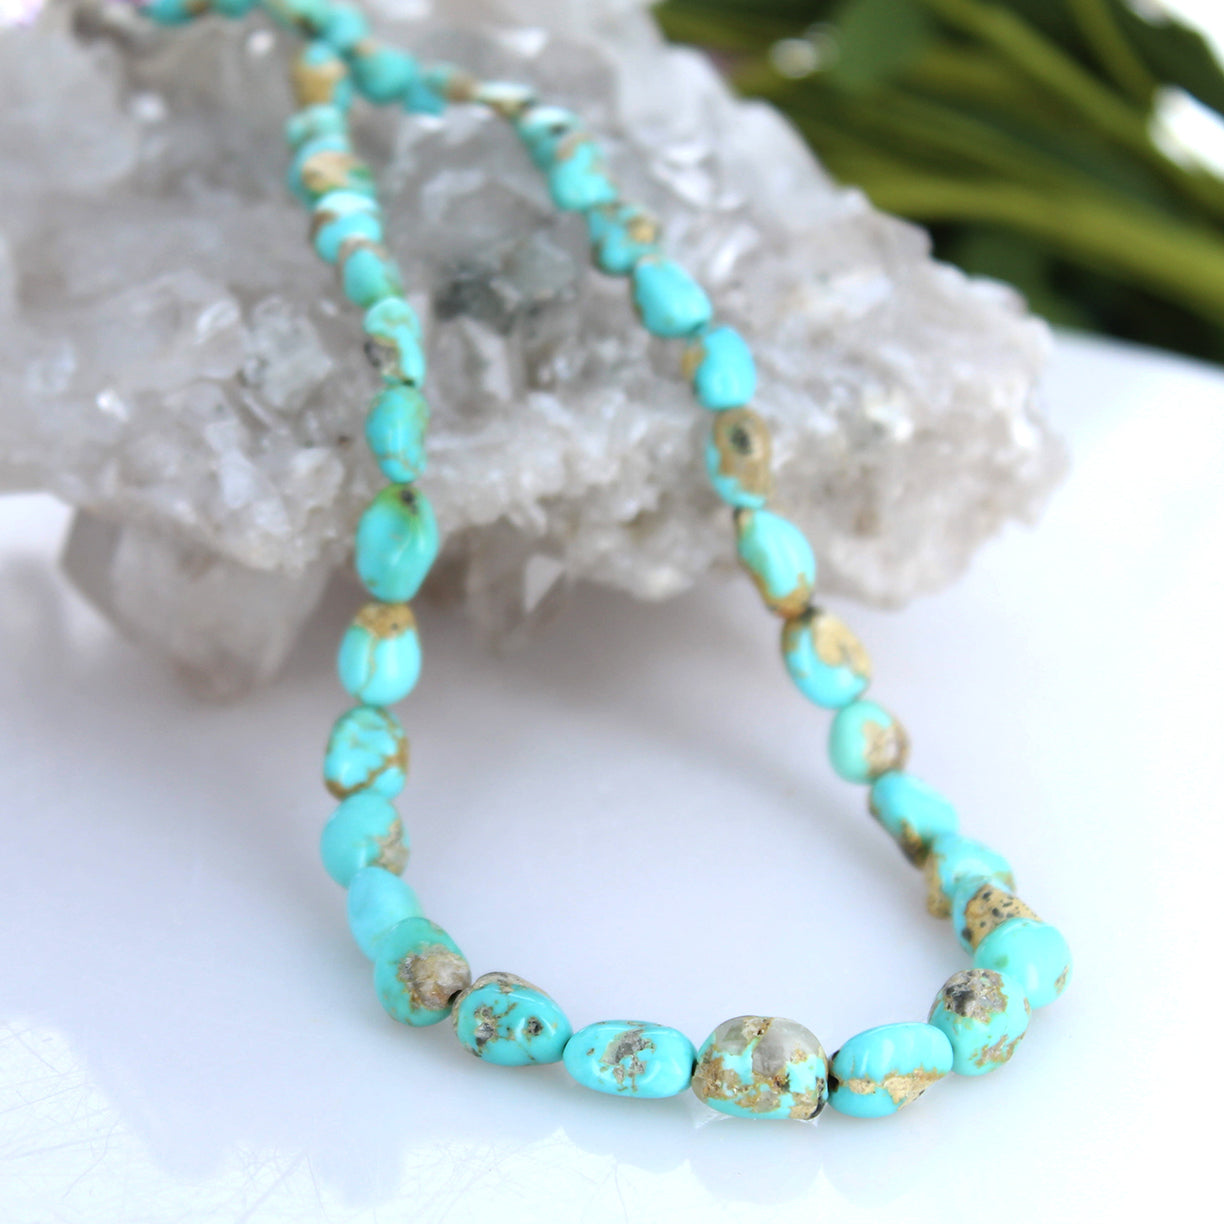 Sonoran Gold Turquoise Beads Bright Blue 8-12mm 16"